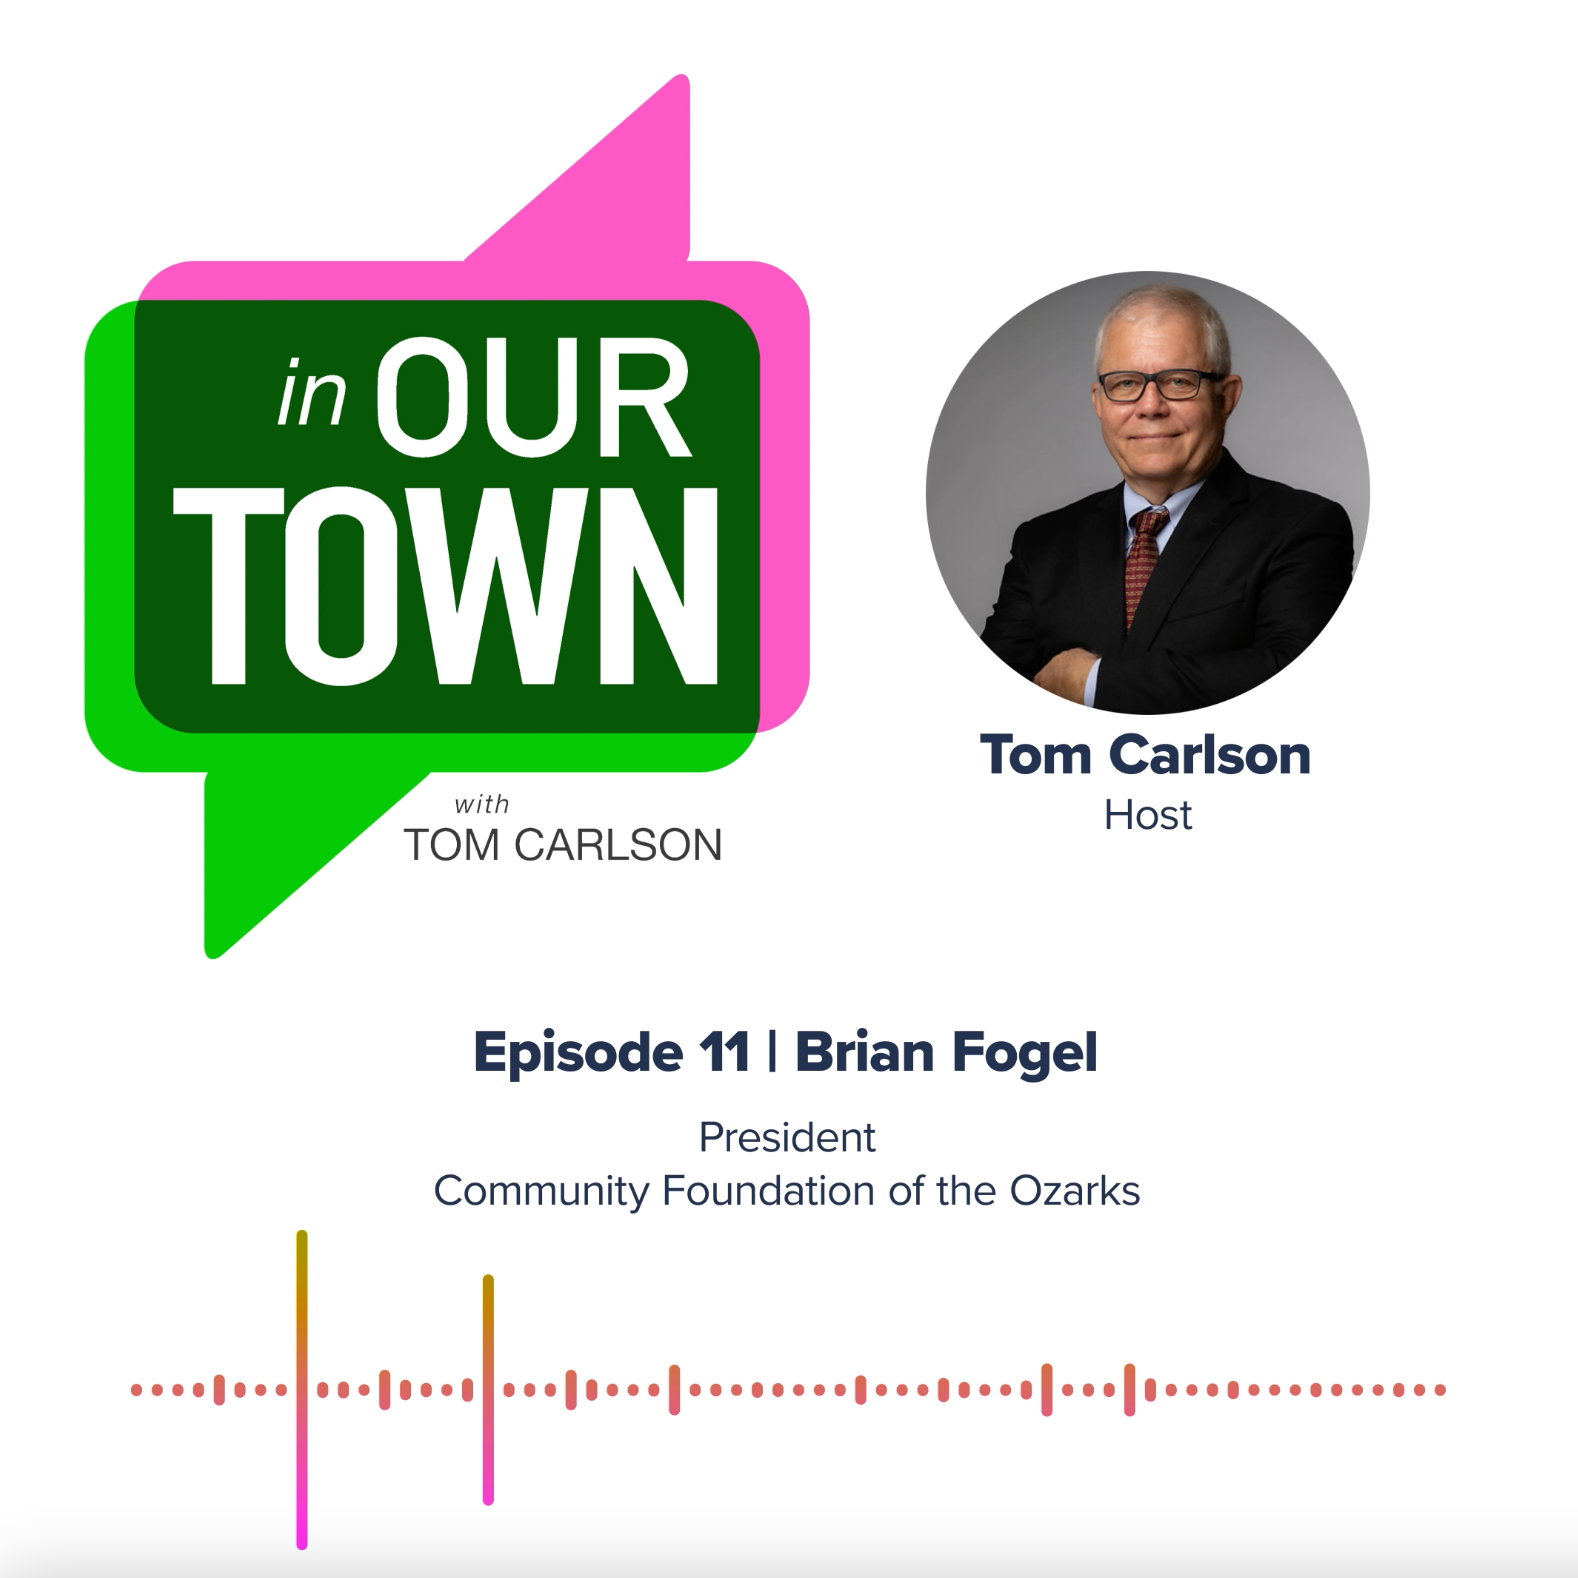 Screenshot of the "In Our Town" podcast